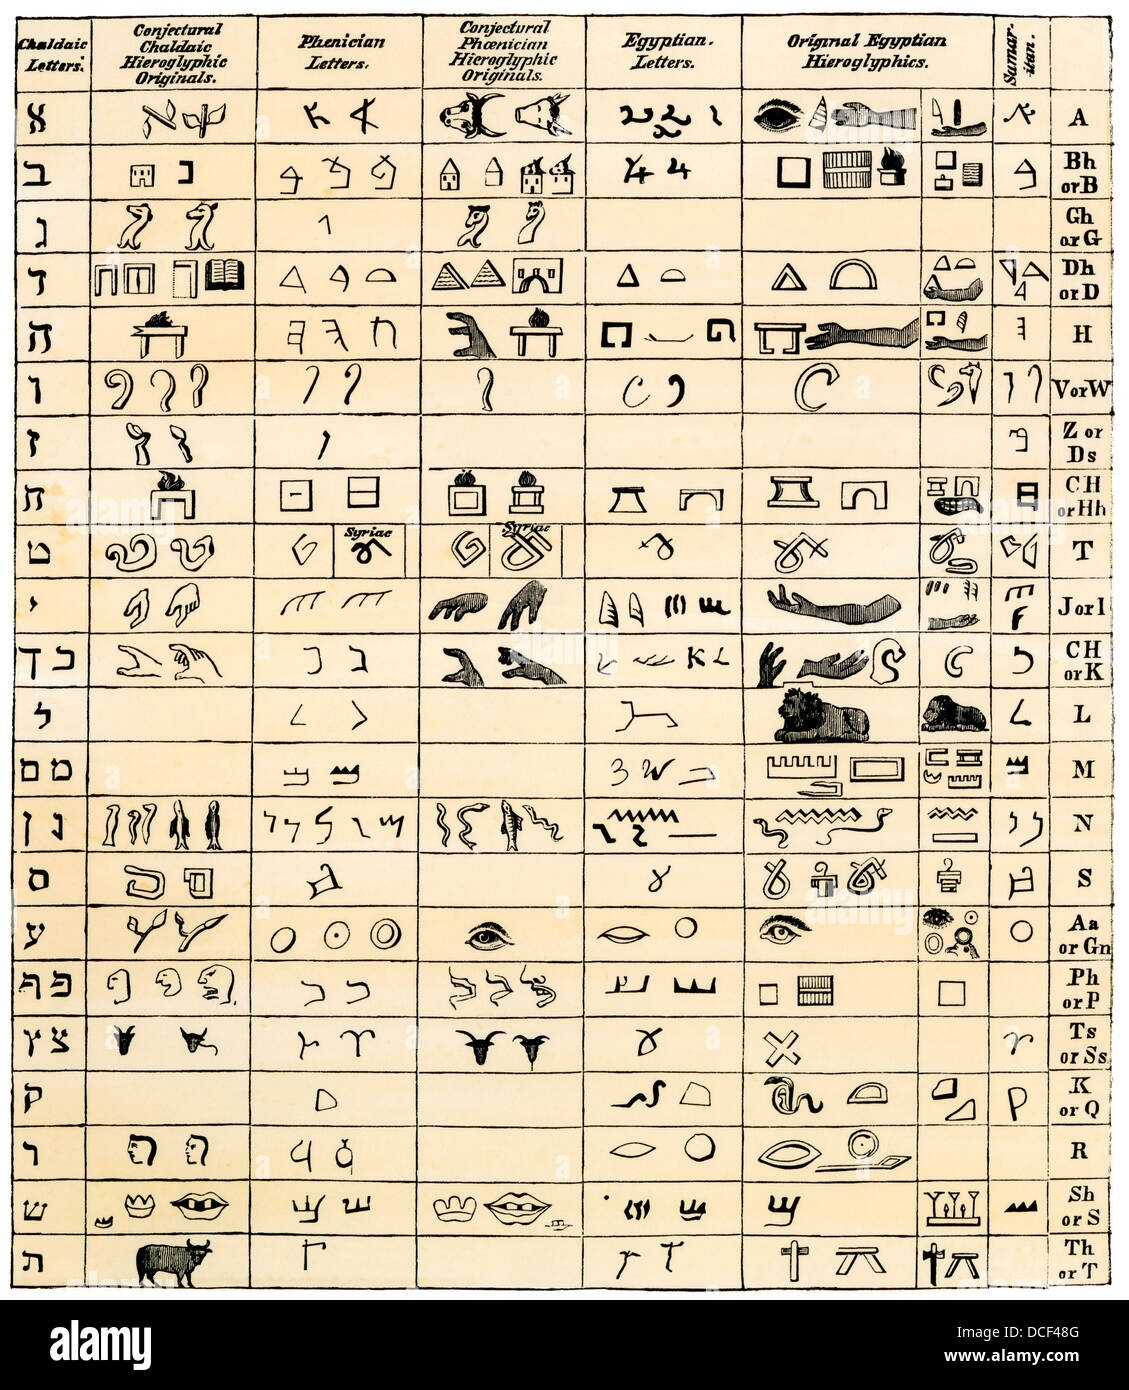 Table comparing hieroglyphic and ancient alphabet characters including Chaldaic, Phoenician, and Sumerian letters. Hand-colored woodcut Stock Photo